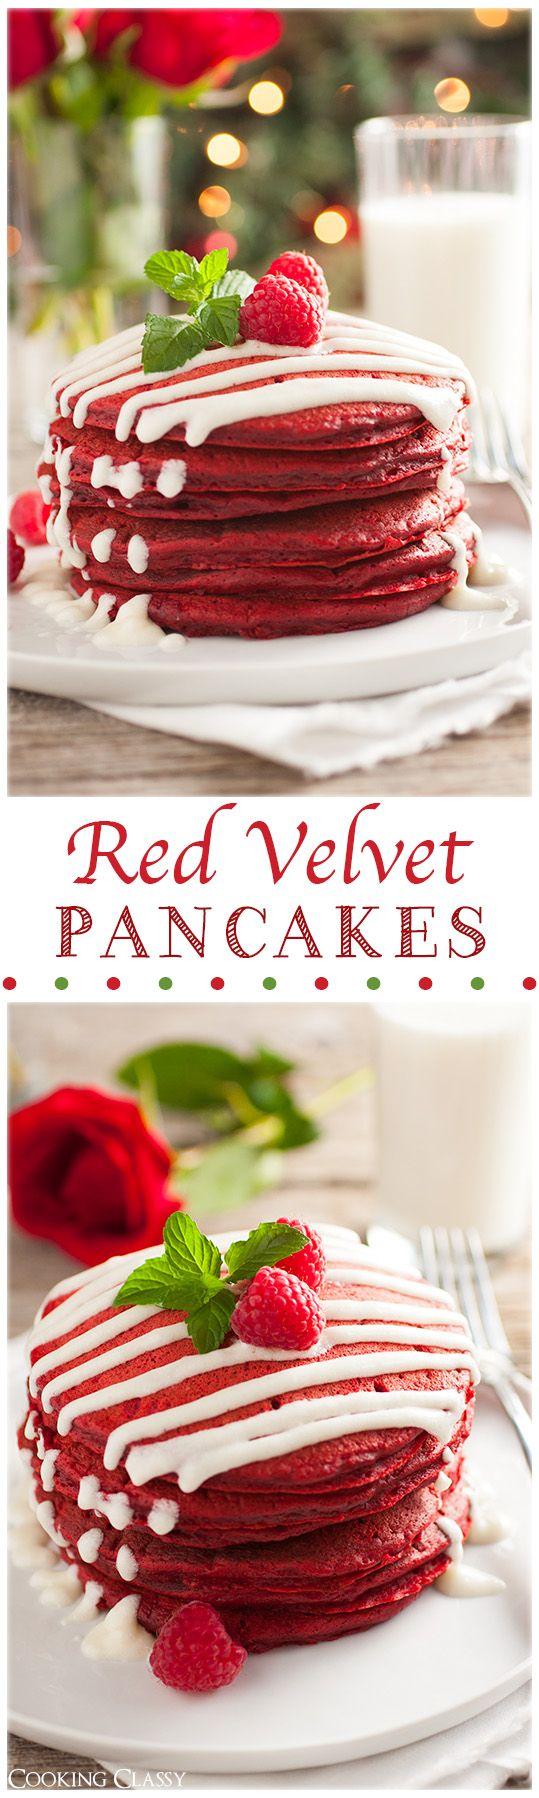 Wedding - Red Velvet Pancakes With Cream Cheese Glaze (Perfect For Christmas)